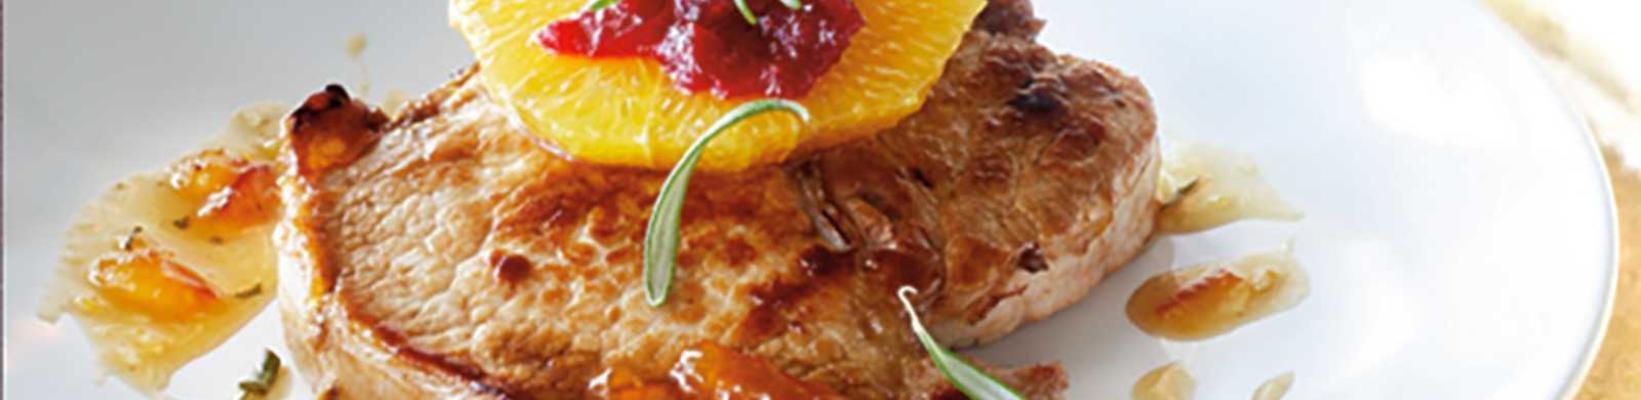 hare chop with orange and cranberries